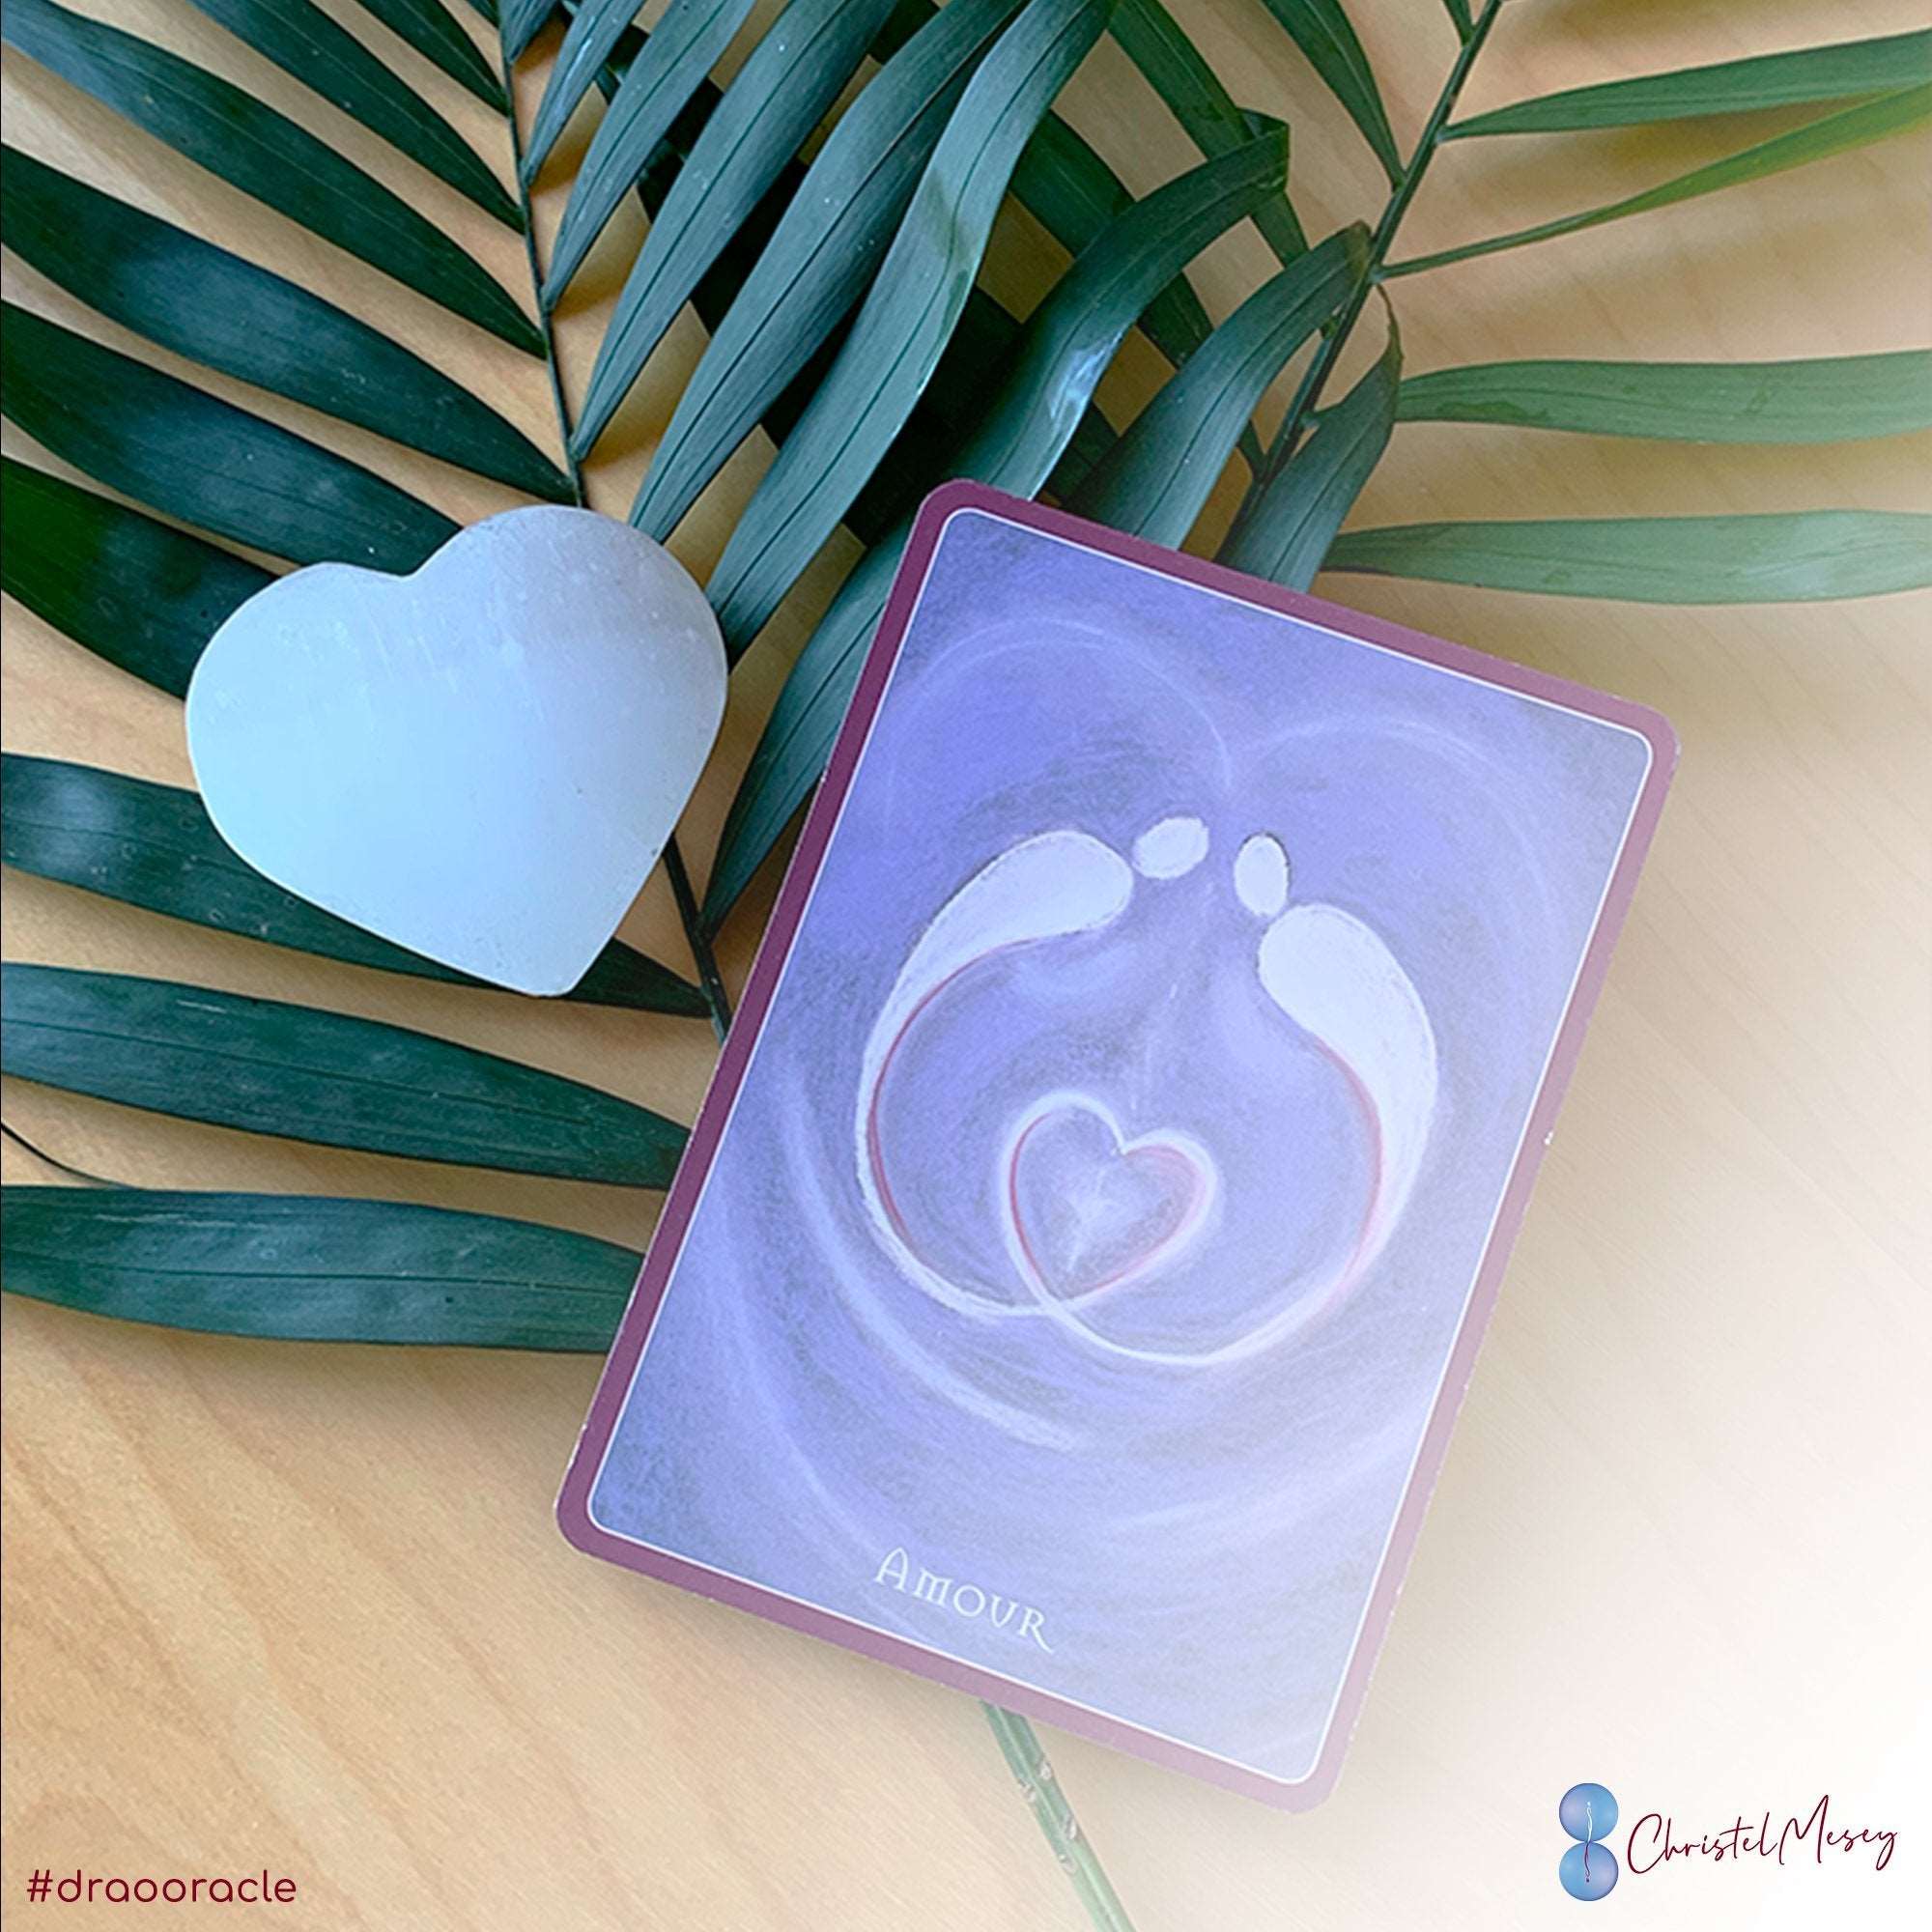 DRAO ORACLE DECK - Personal growth inspirational cards (FrenchDRAO ORACLE DECK - Personal growth inspirational cards (French AND Eng